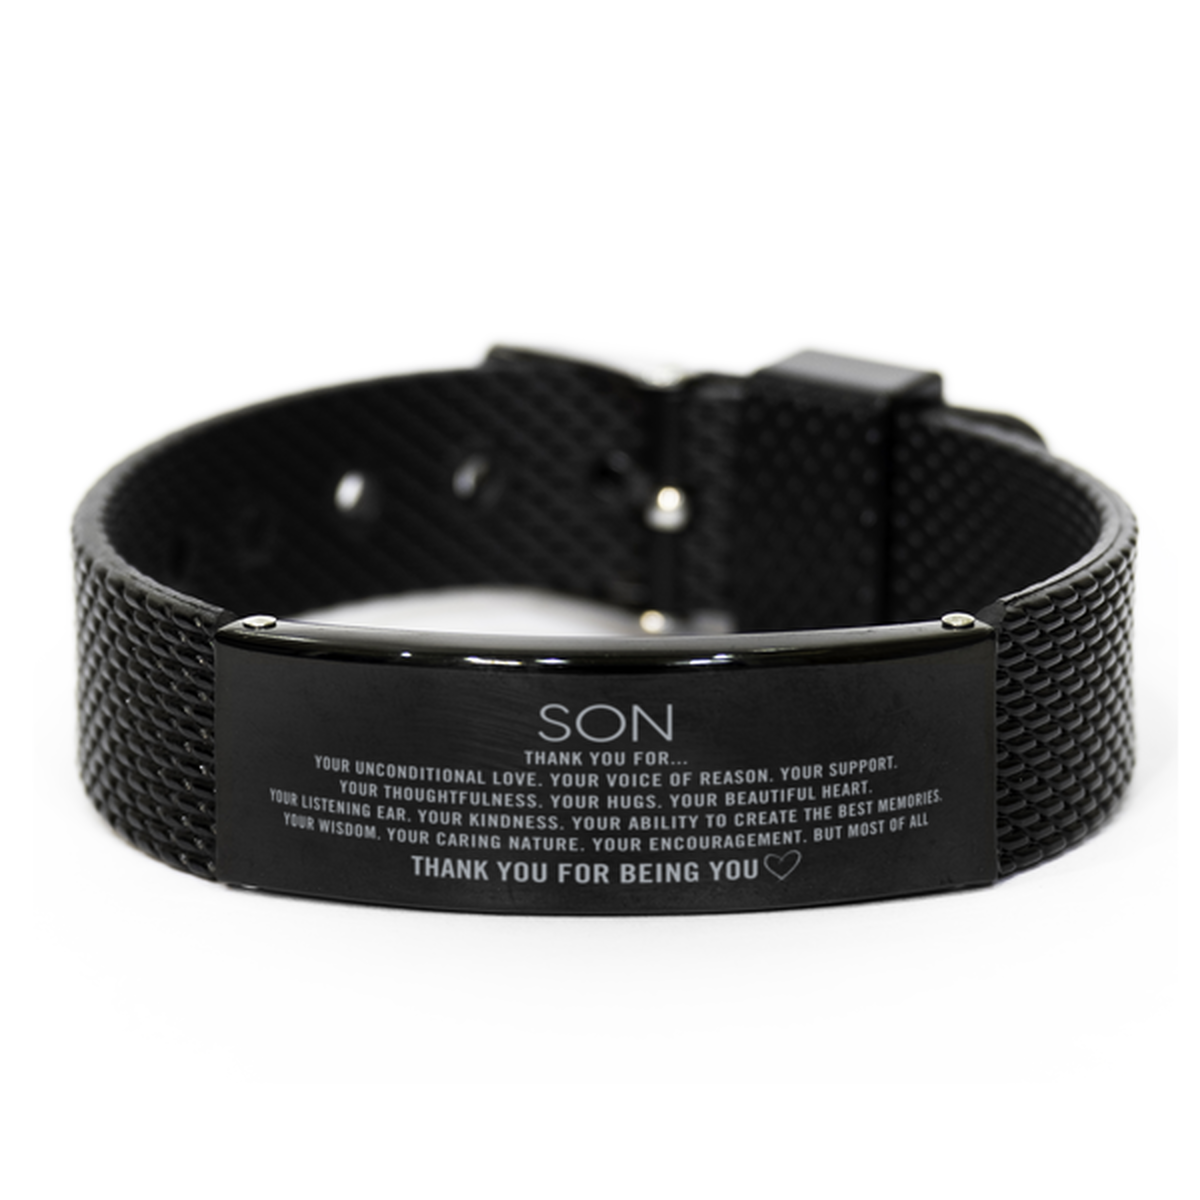 Son Black Shark Mesh Bracelet Custom, Engraved Gifts For Son Christmas Graduation Birthday Gifts for Men Women Son Thank you for Your unconditional love